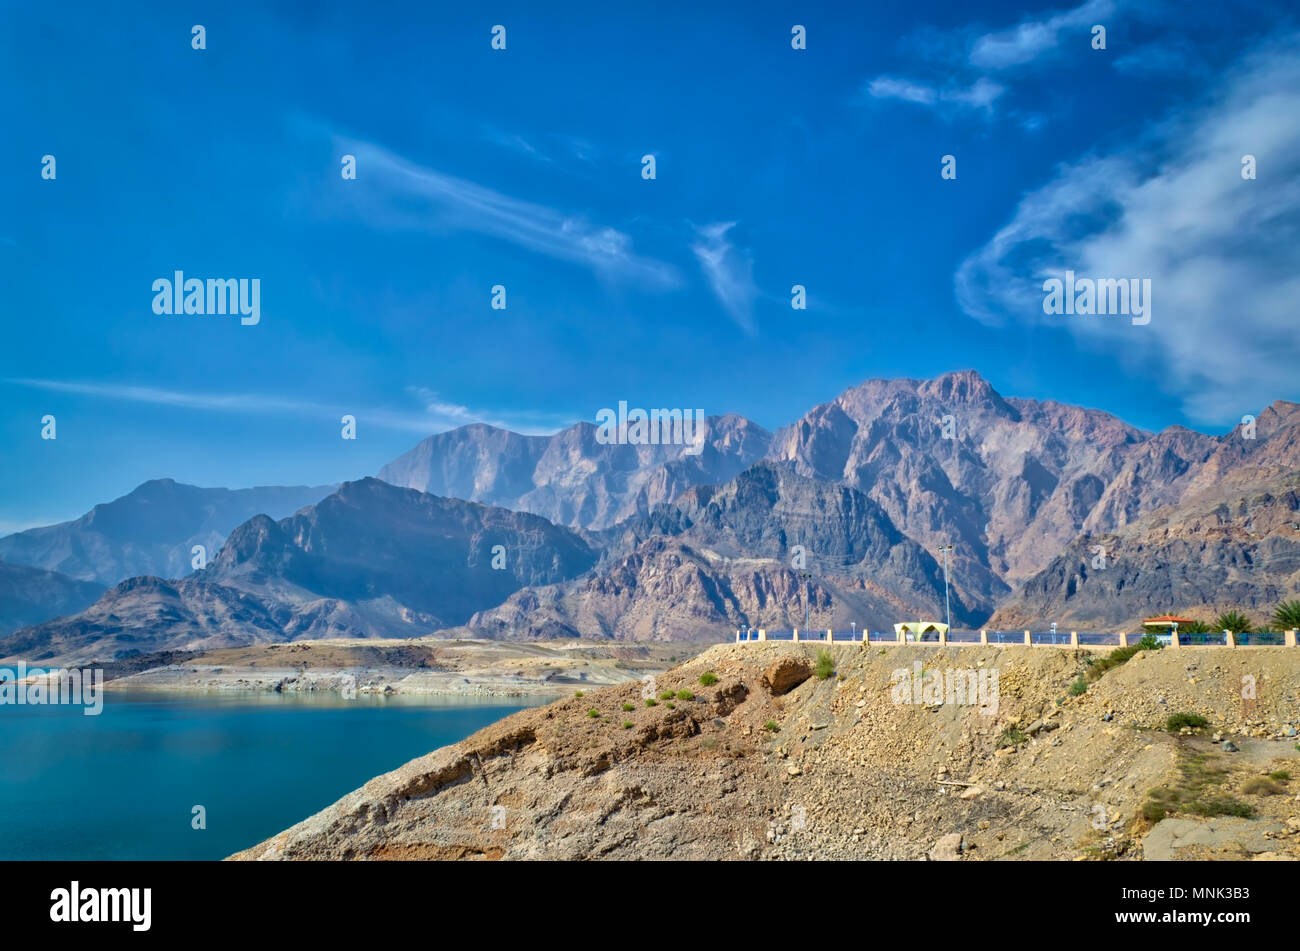 Muscat landscape of mountains, blue sky and water. Peace and tranquility. Stock Photo